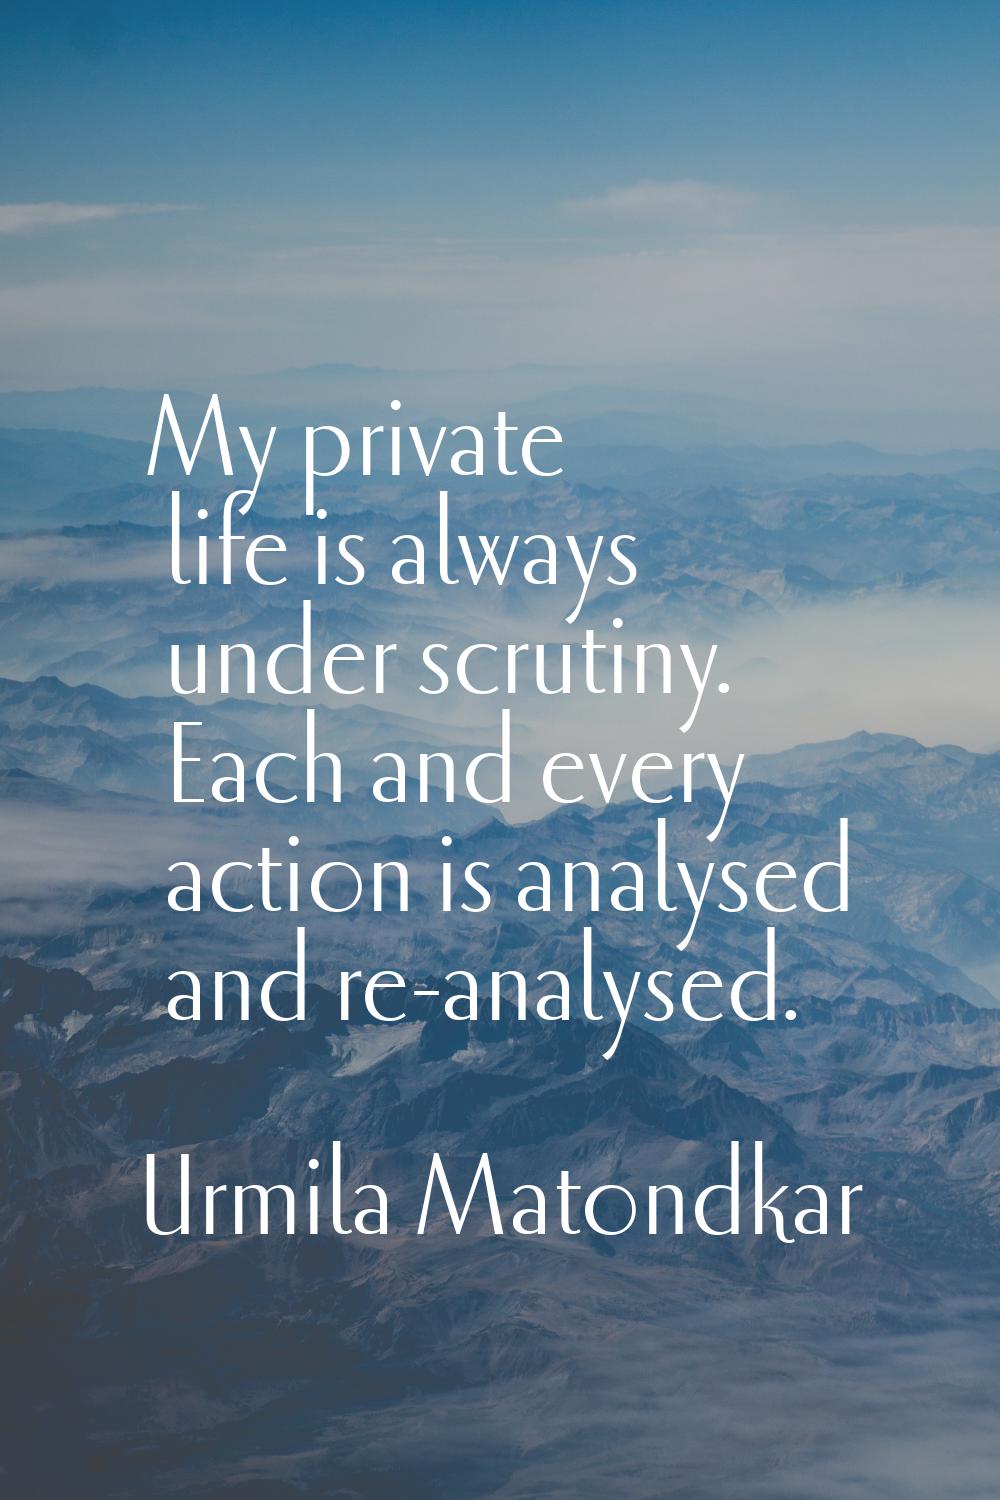 My private life is always under scrutiny. Each and every action is analysed and re-analysed.